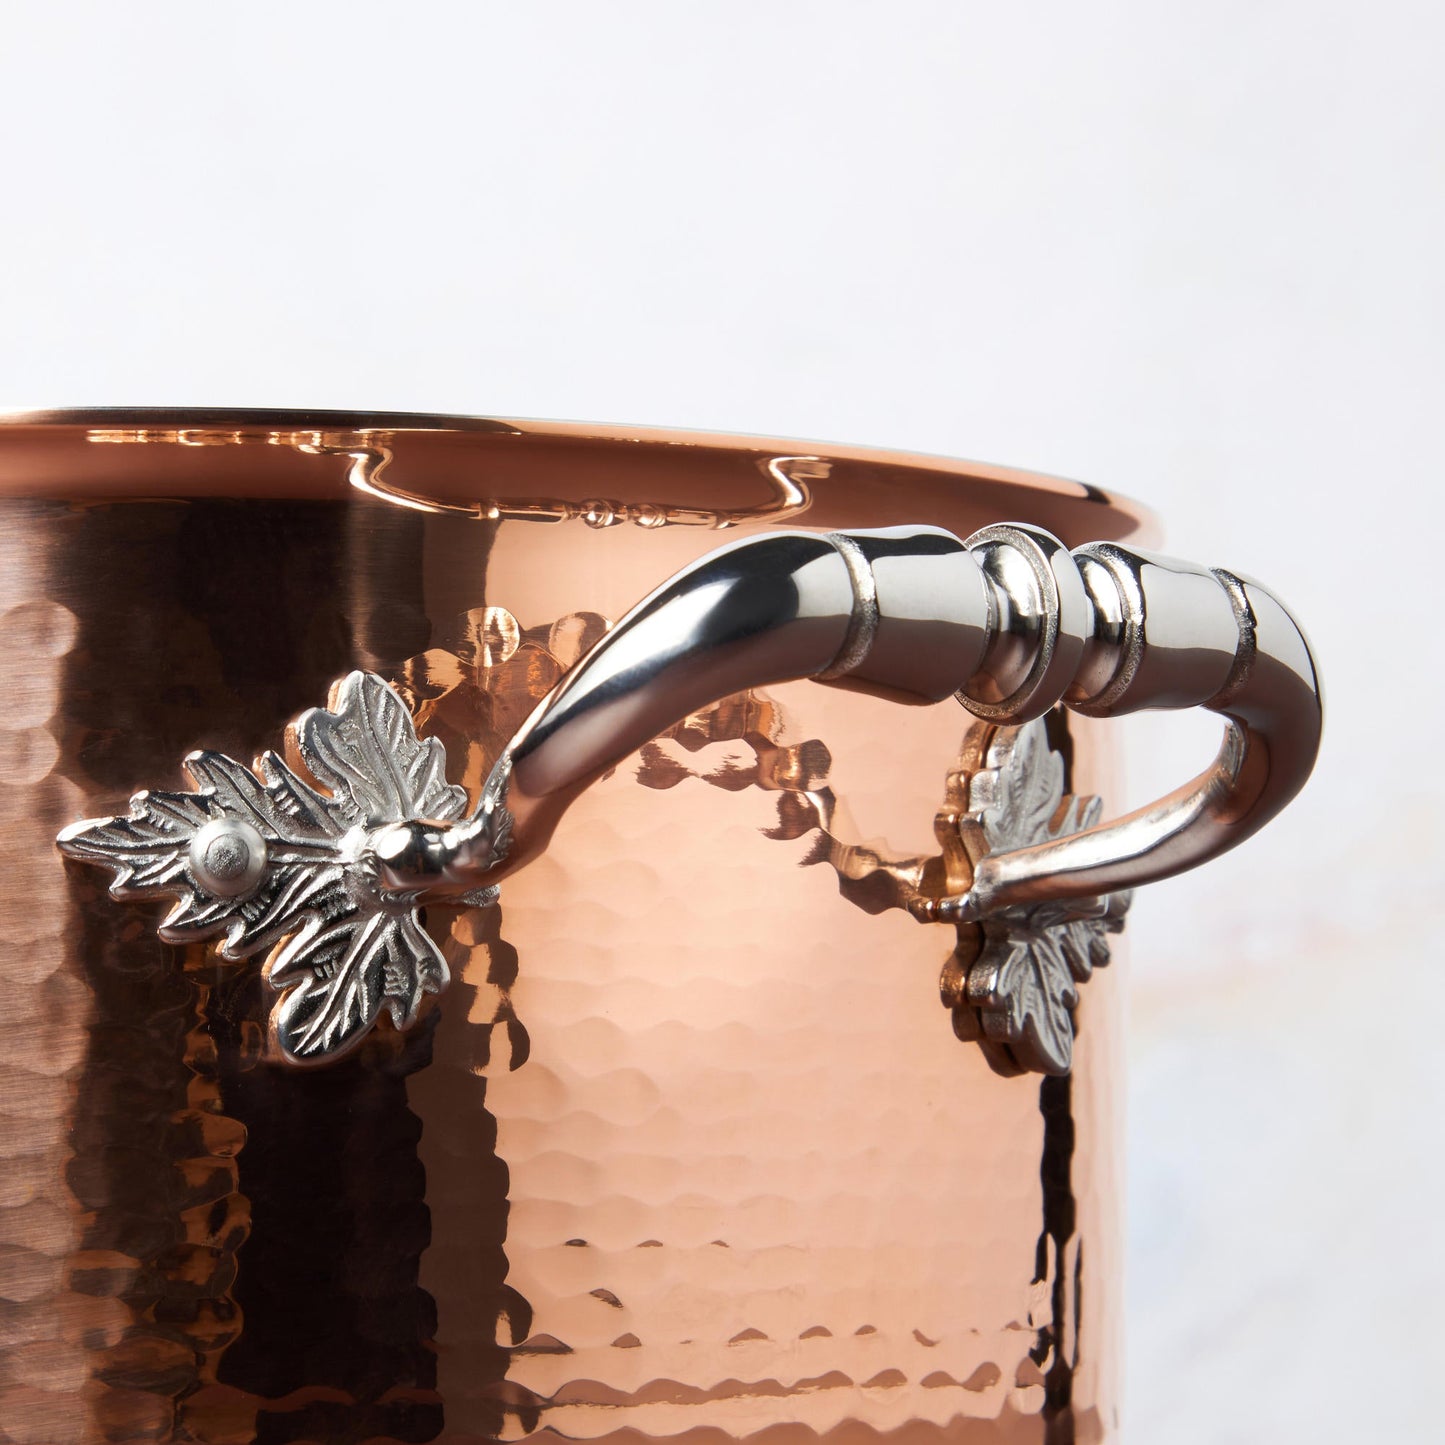 Beautiful stainless steel handle decorated with delicate leaves on Opus Cupra cookware by Ruffoni